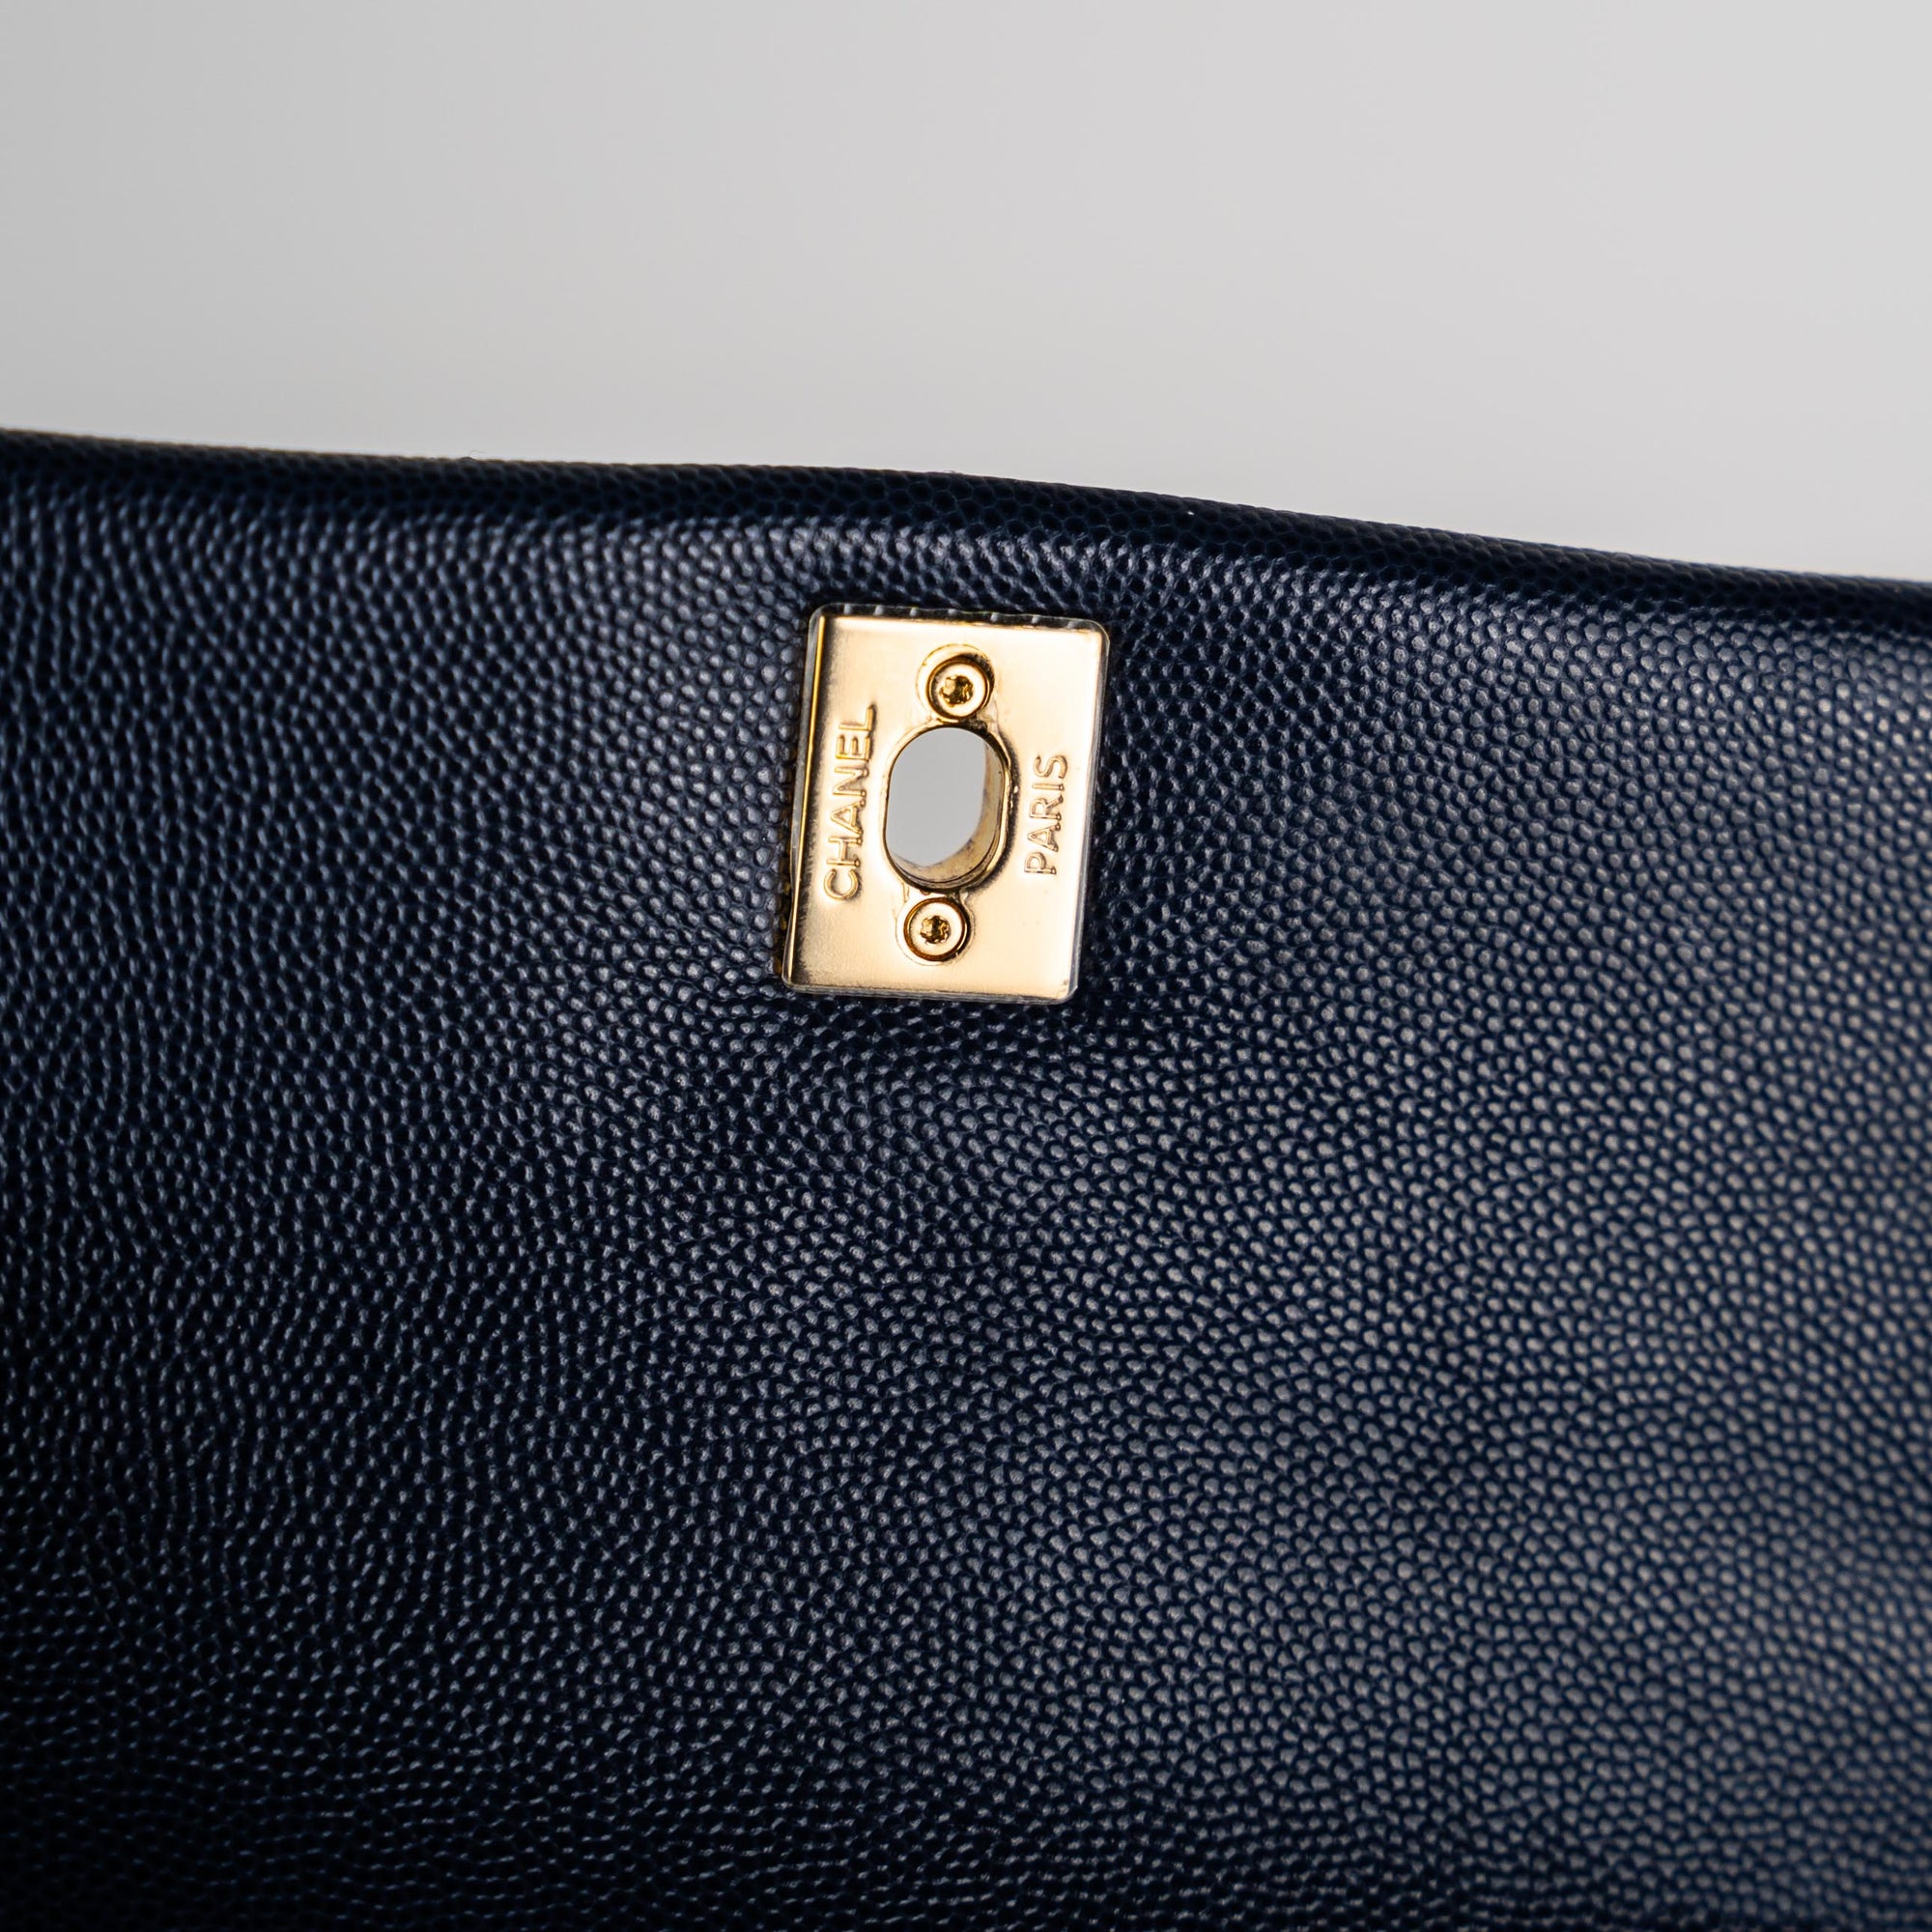 Chanel Coco Handle Navy Small - THE PURSE AFFAIR